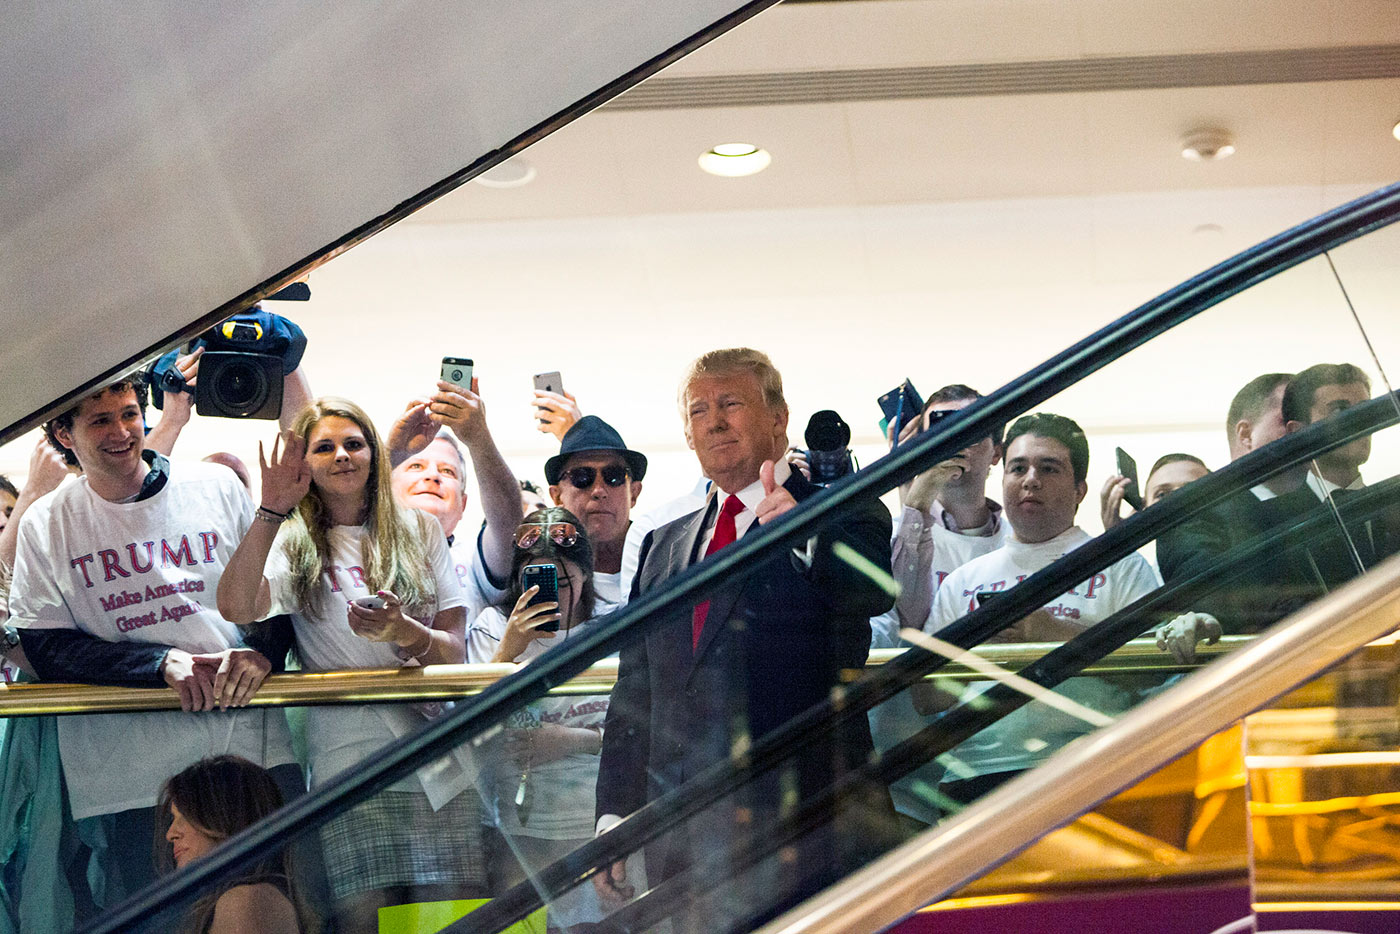 Donald Trump rides an escalator to a press event to announce his candidacy for the US presidency at Trump Tower on 16 June 2015